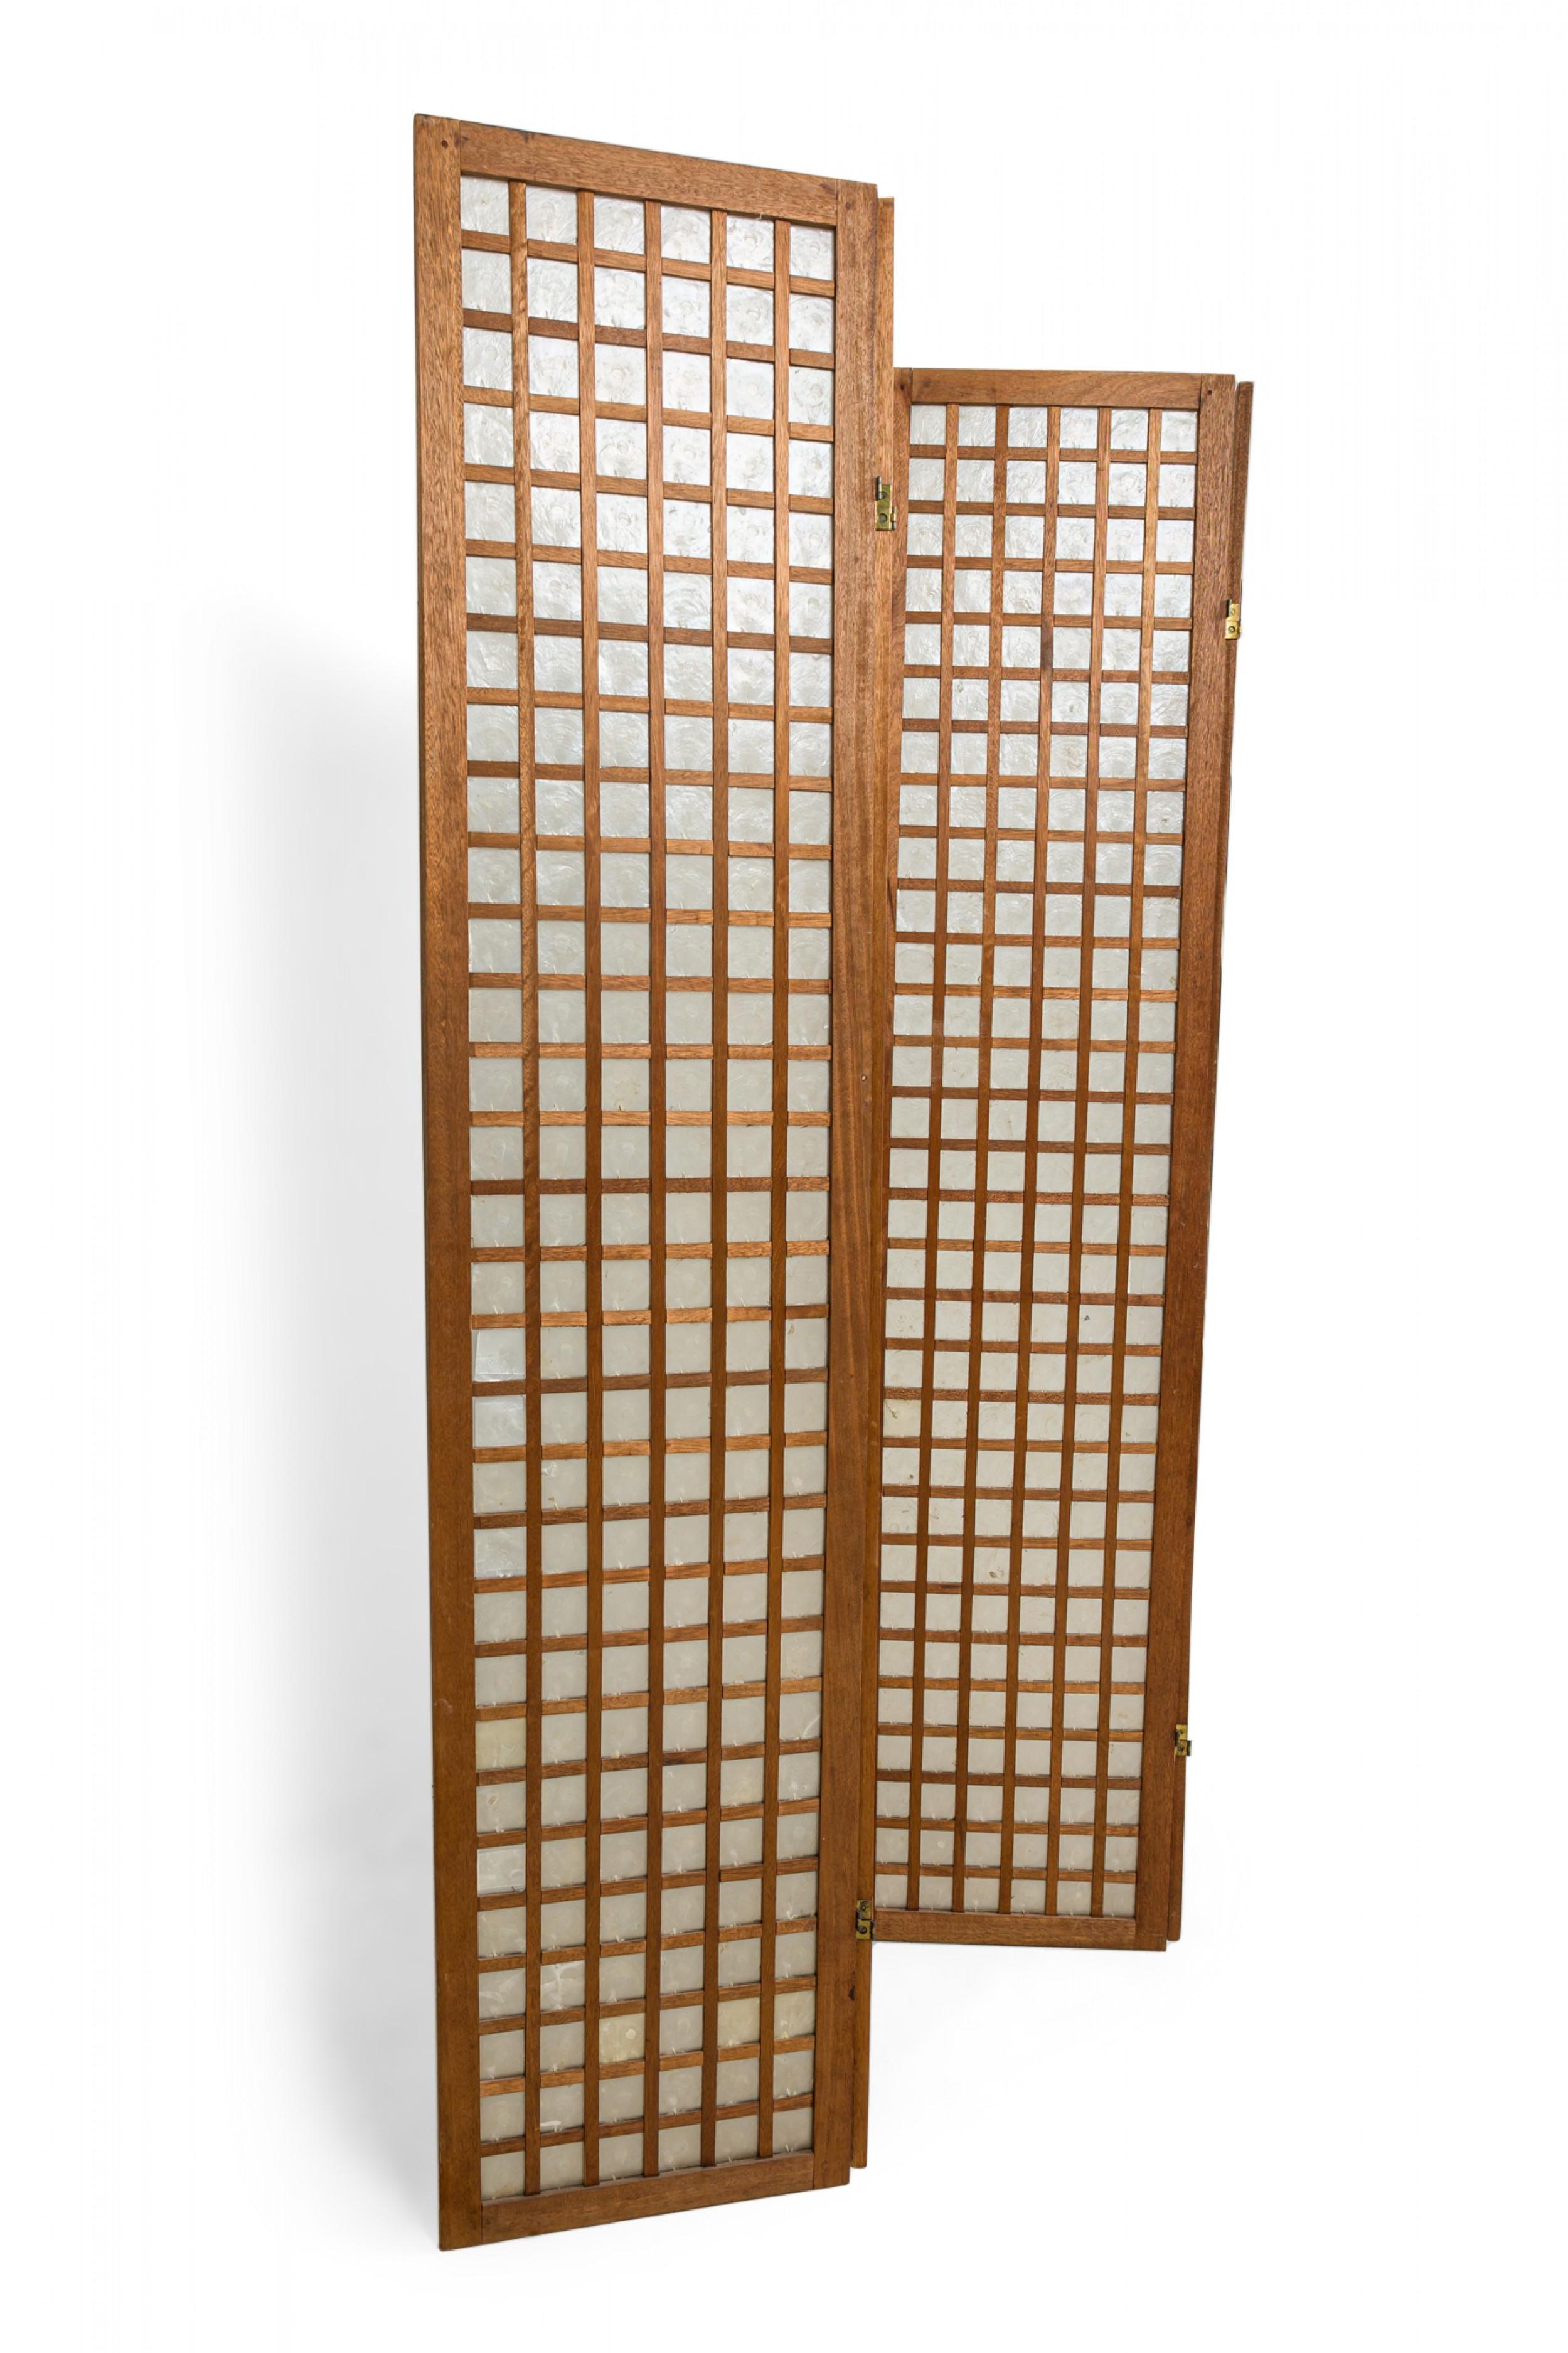 French Mid-Century Modern 4-panel folding screen with a frame constructed from cerused wood in a grid pattern centering square mother of pearl panels.
 

 Separation in frame, cracks and losses to mother of pearl insets.
